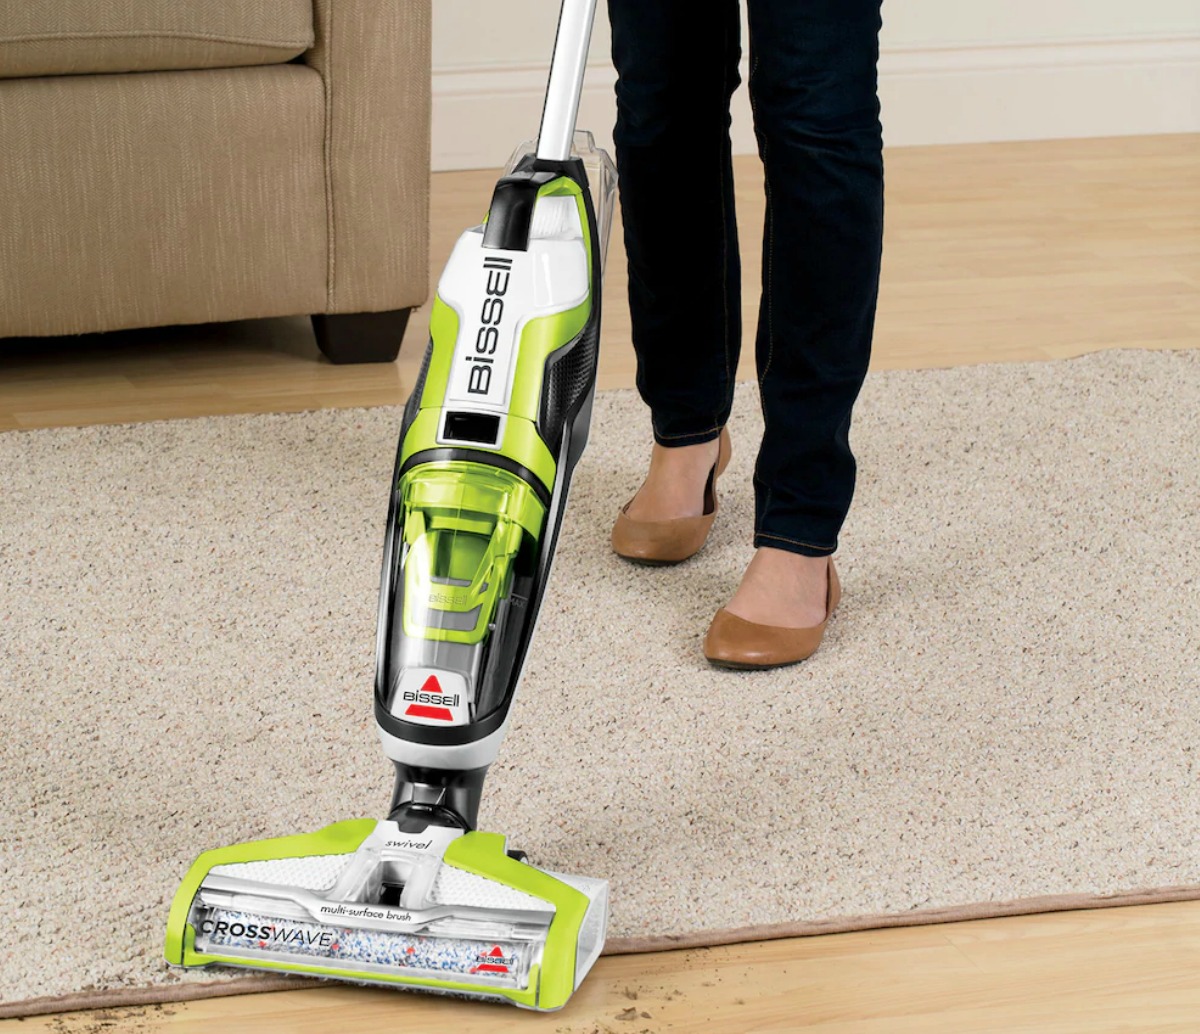 Woman using a green and white all-in-one vacuum cleaner on hardwood floors